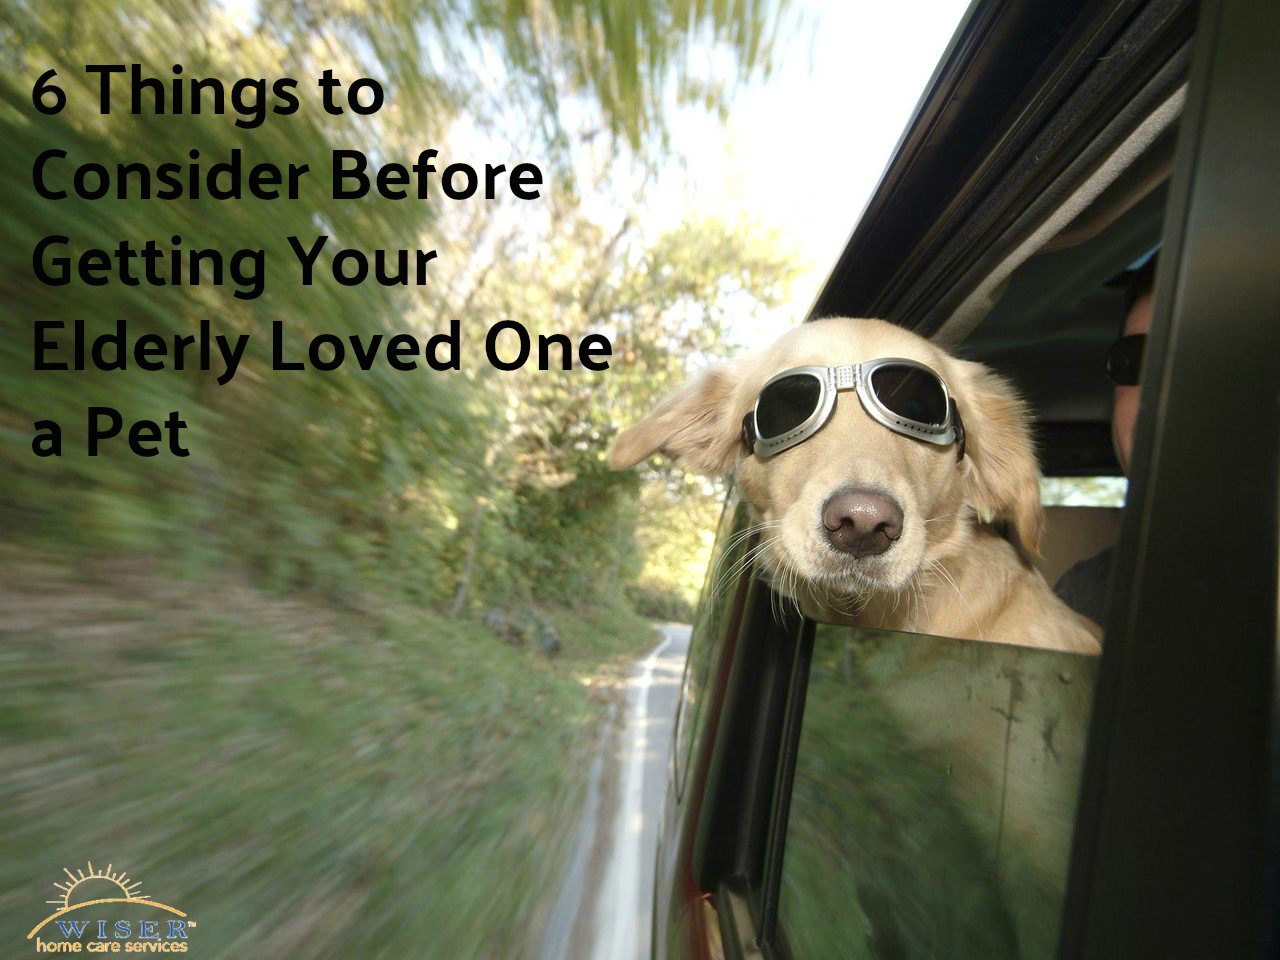 Their unconditional love & loyalty, make pets a great companion for the elderly. Here are 6 things to consider before getting your elderly loved one a pet.